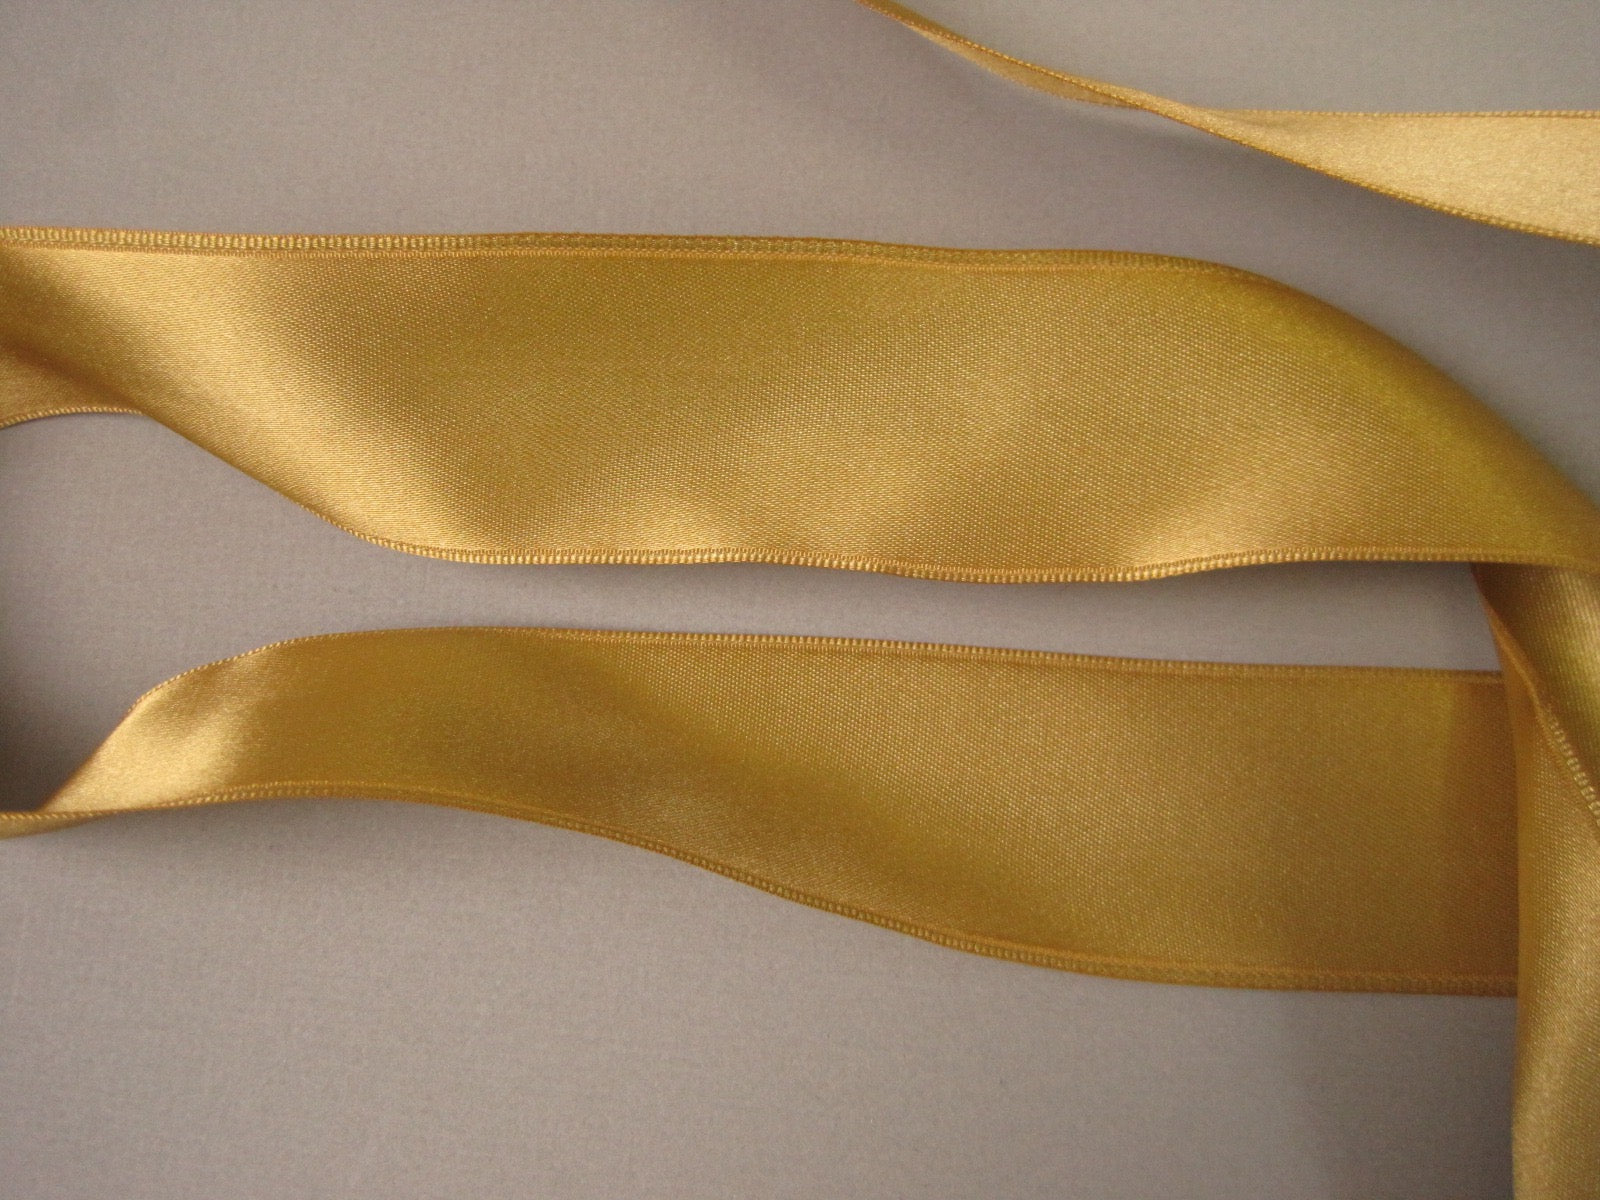 Vintage 60s gold metallic ribbon double sided satin rayon 1.5 inch wide